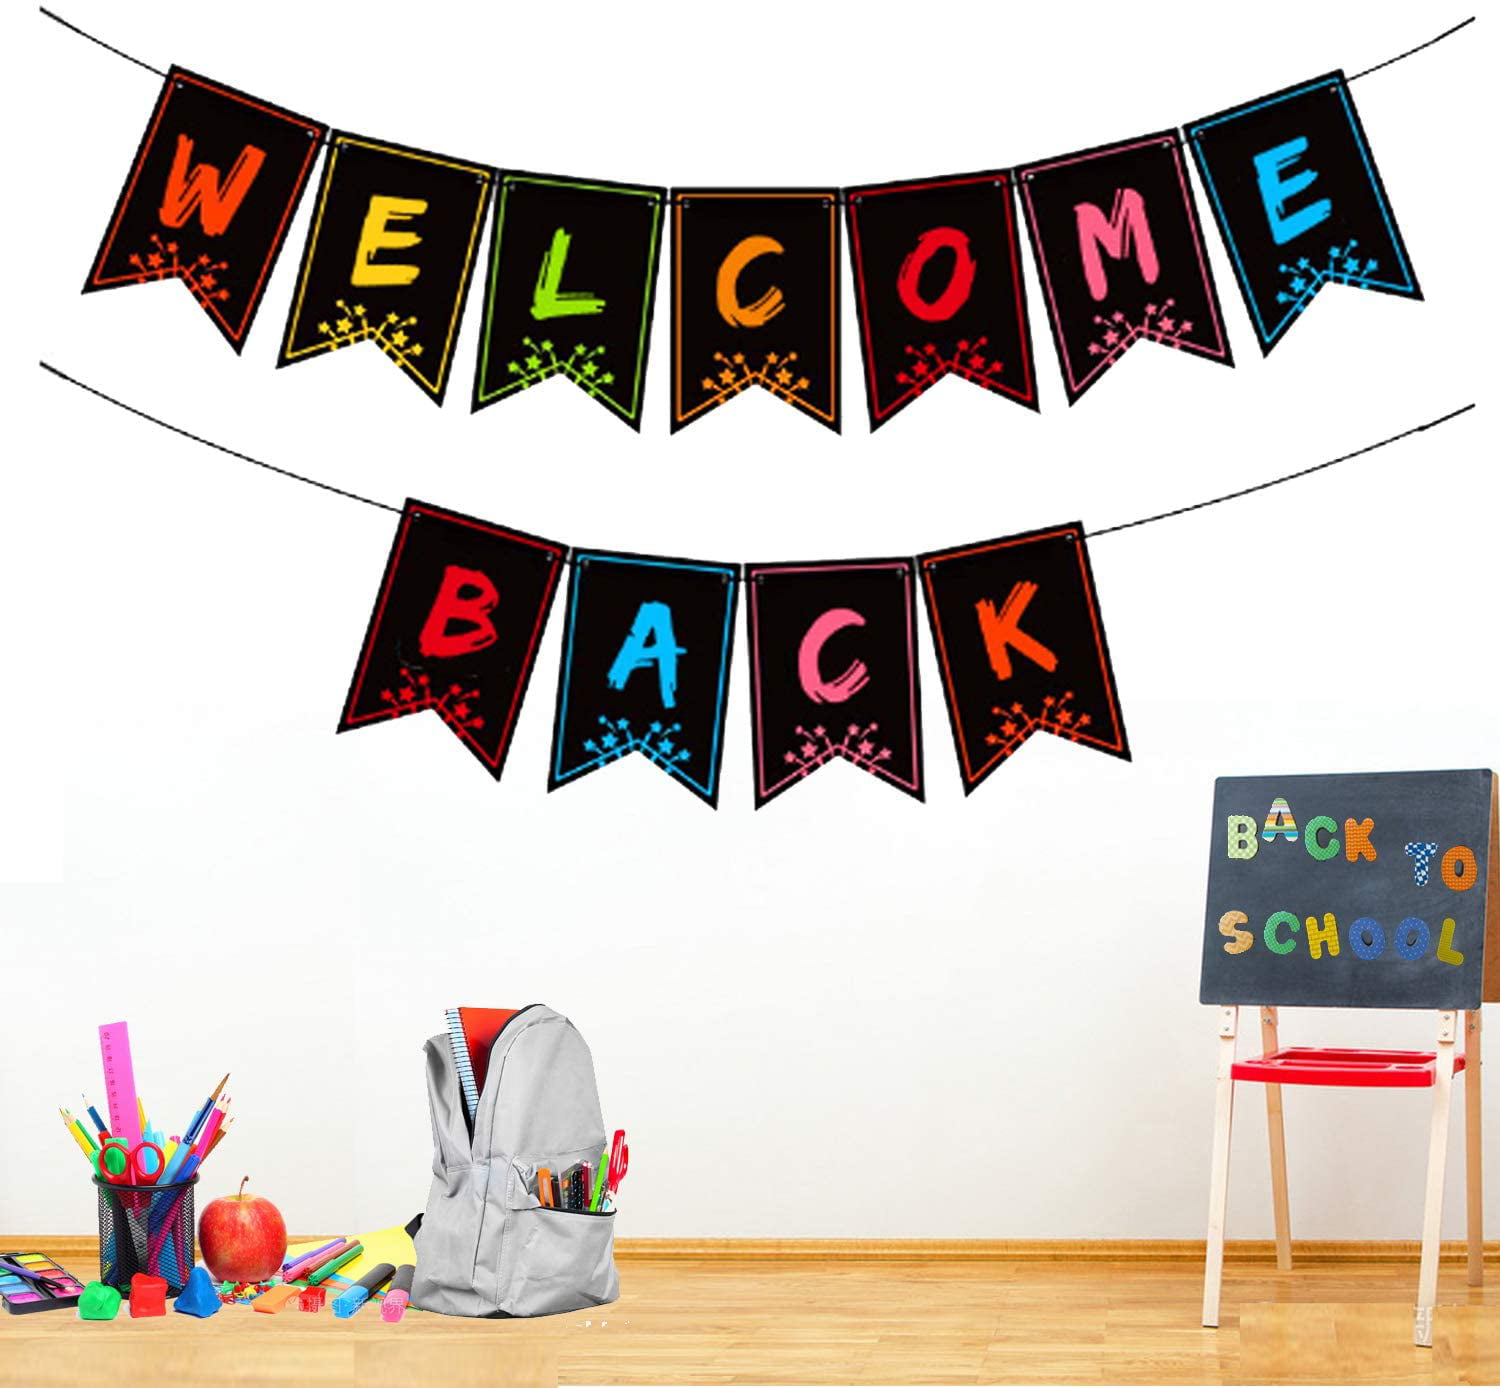 Classroom Decorations Welcome Banner Welcome Back Banner Welcome Bulletin Board Banner Welcome Chalkboard Brights Pennants with 50 Dry Eraser Multi-Purpose Cards and 80 Glue Point Dot 